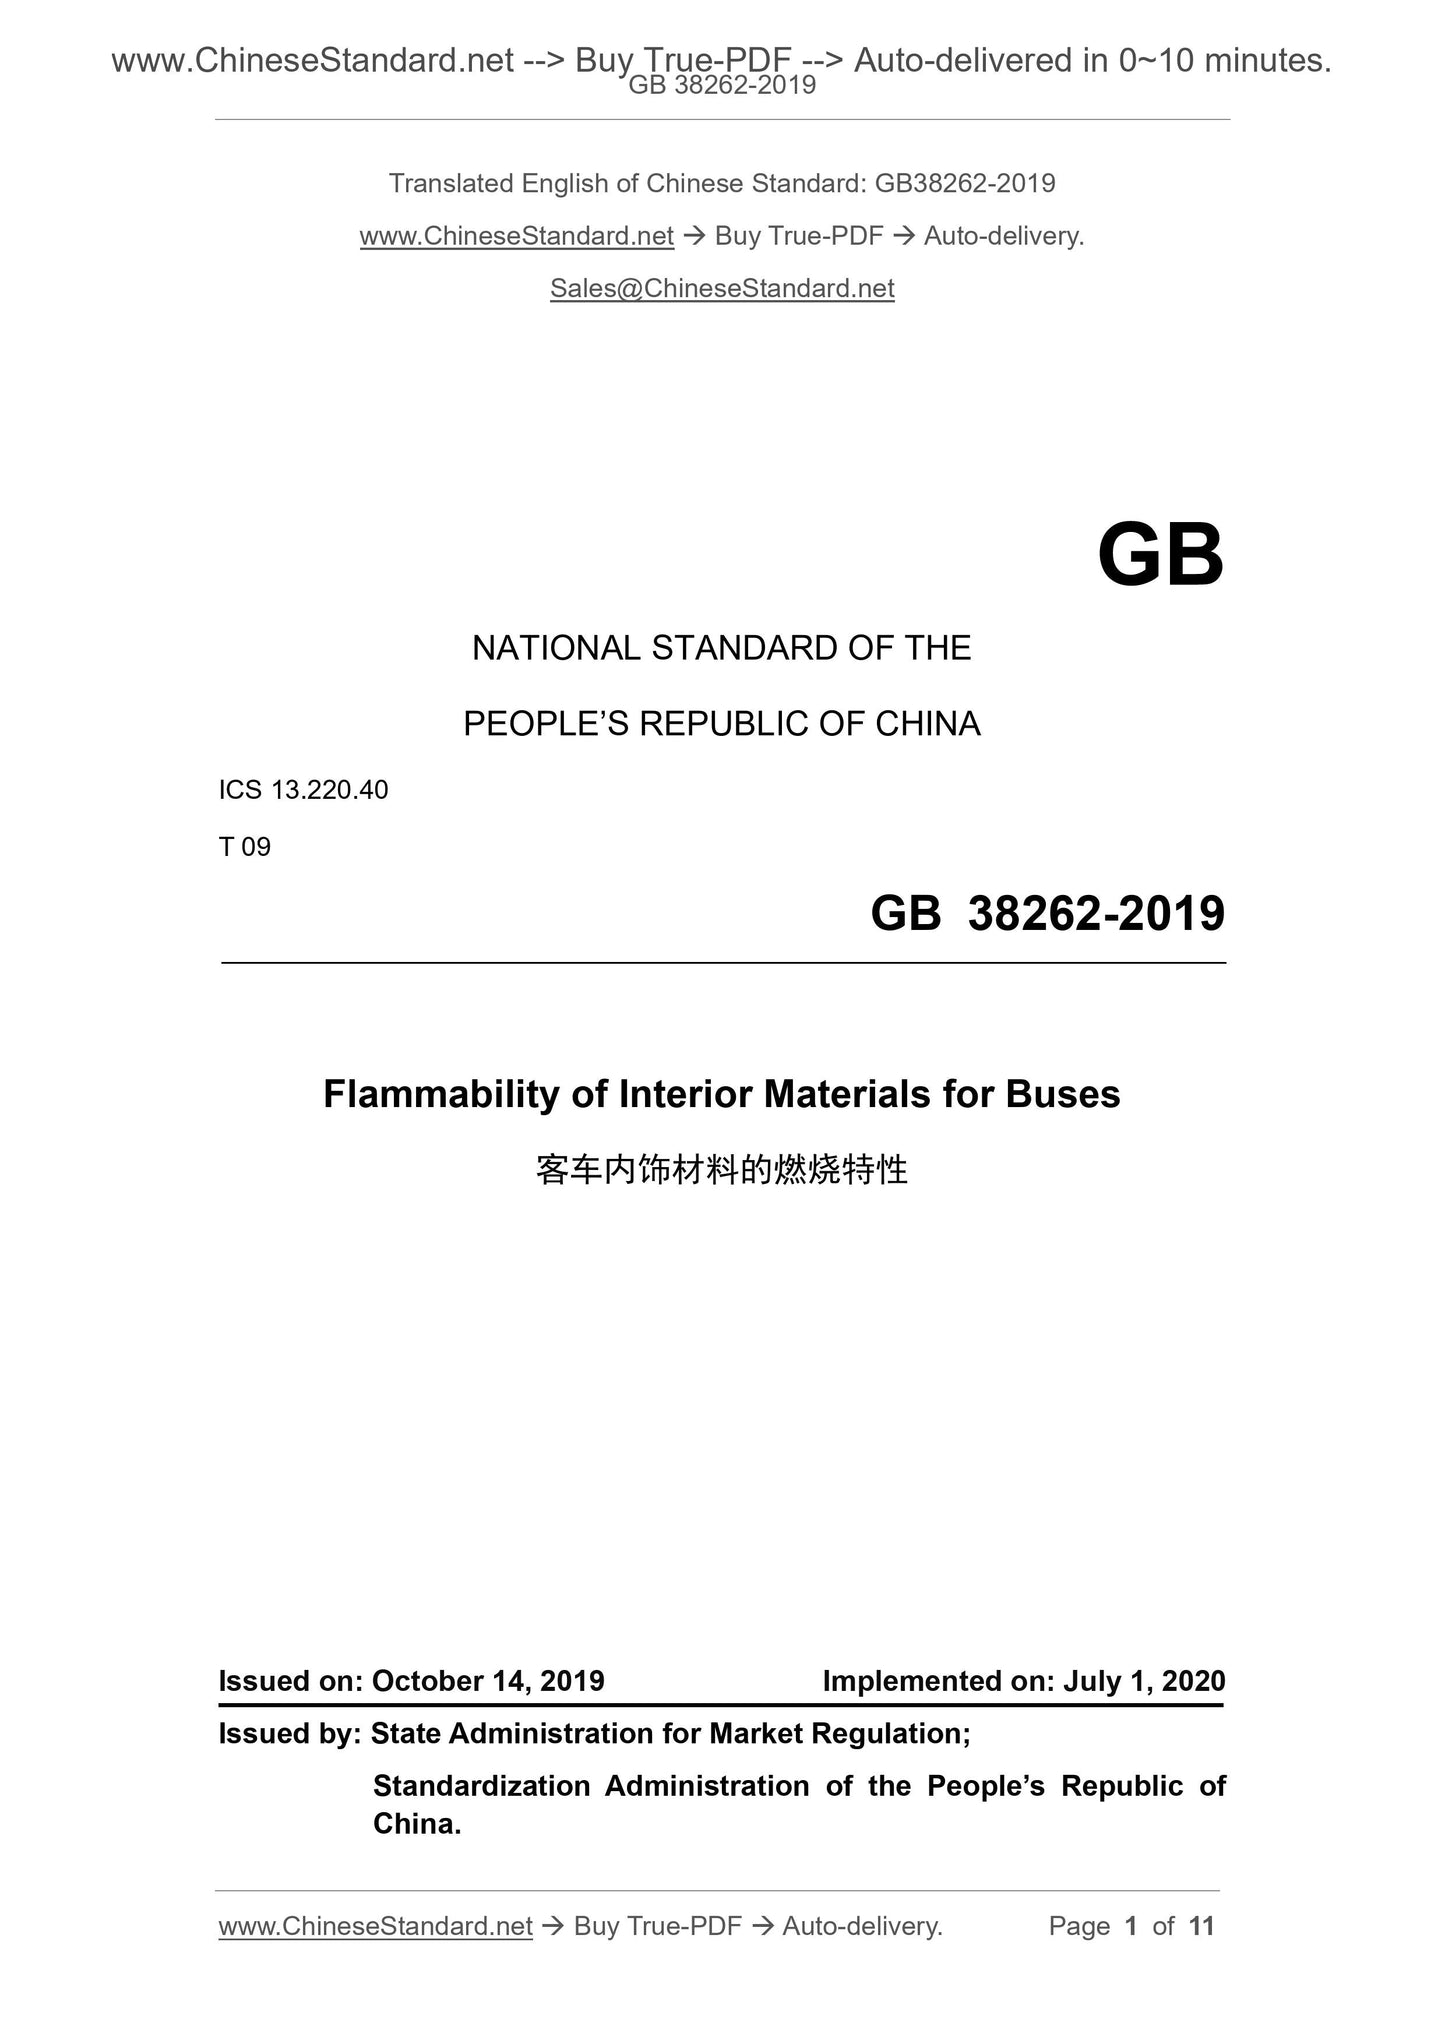 GB 38262-2019 Page 1